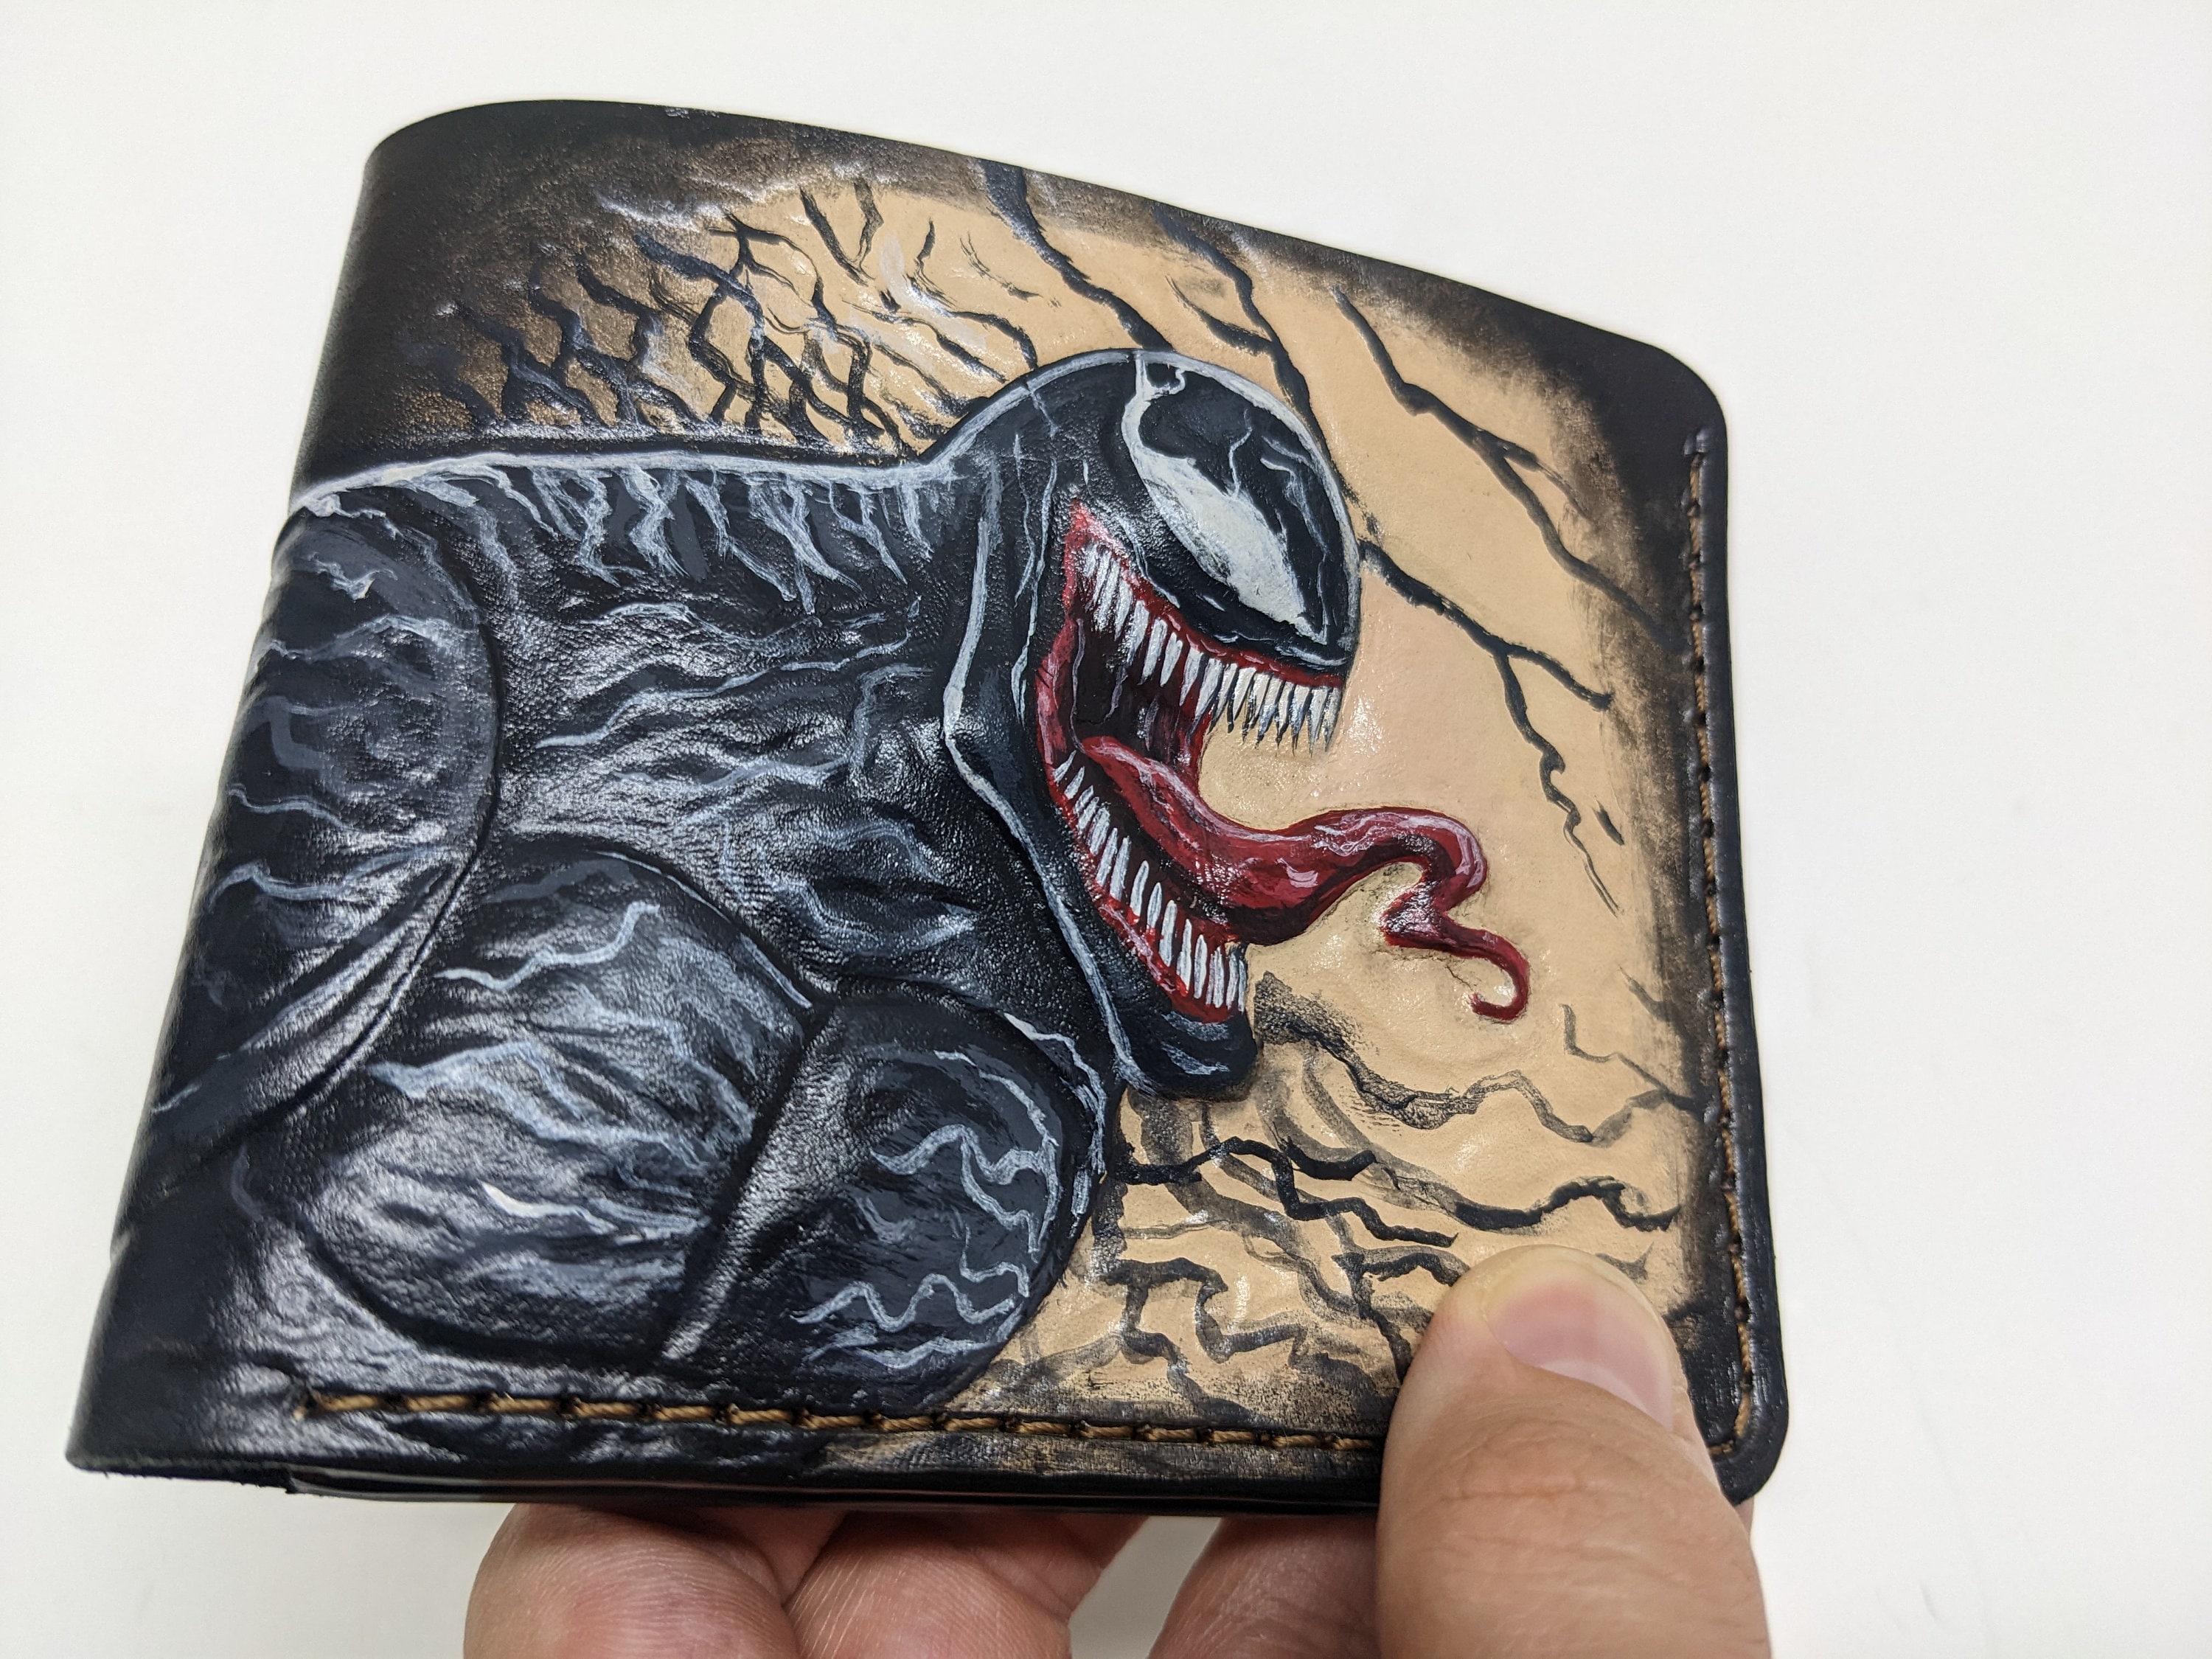 Men's 3D Genuine Leather Wallet, Hand-Carved, Hand-Painted, Leather Carving, Custom Wallet, Personalized Wallet, Spiderman